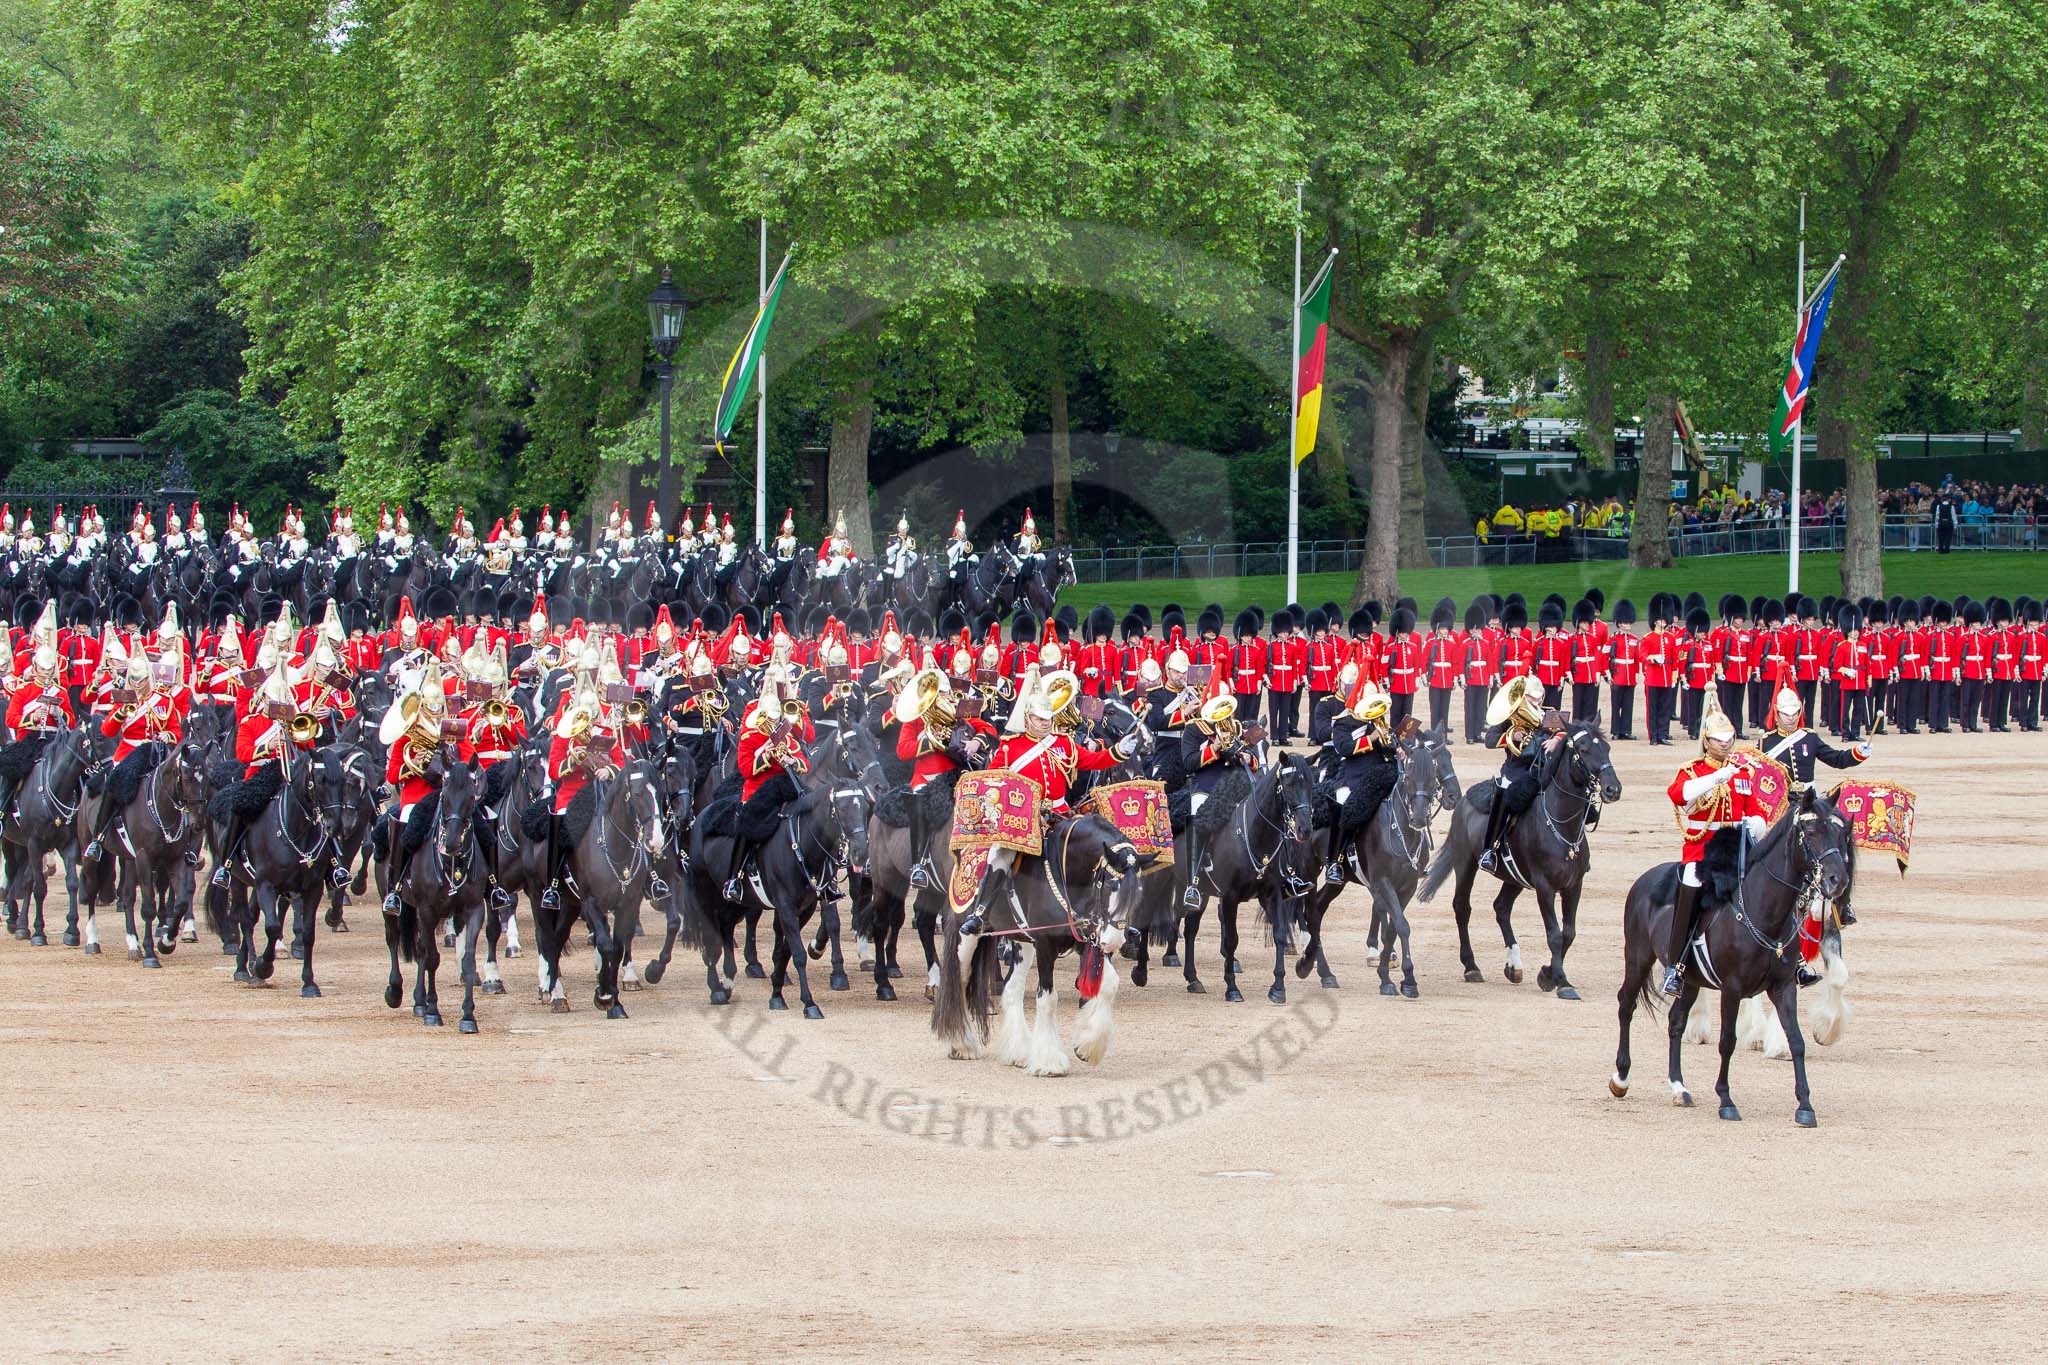 Major General's Review 2013: The Director of Music of the Household Cavalry, Major Paul Wilman, The Life Guards, during the Mounted Troops Ride Past. Behind him the kettle drummer from The Blues and Royals..
Horse Guards Parade, Westminster,
London SW1,

United Kingdom,
on 01 June 2013 at 11:51, image #583